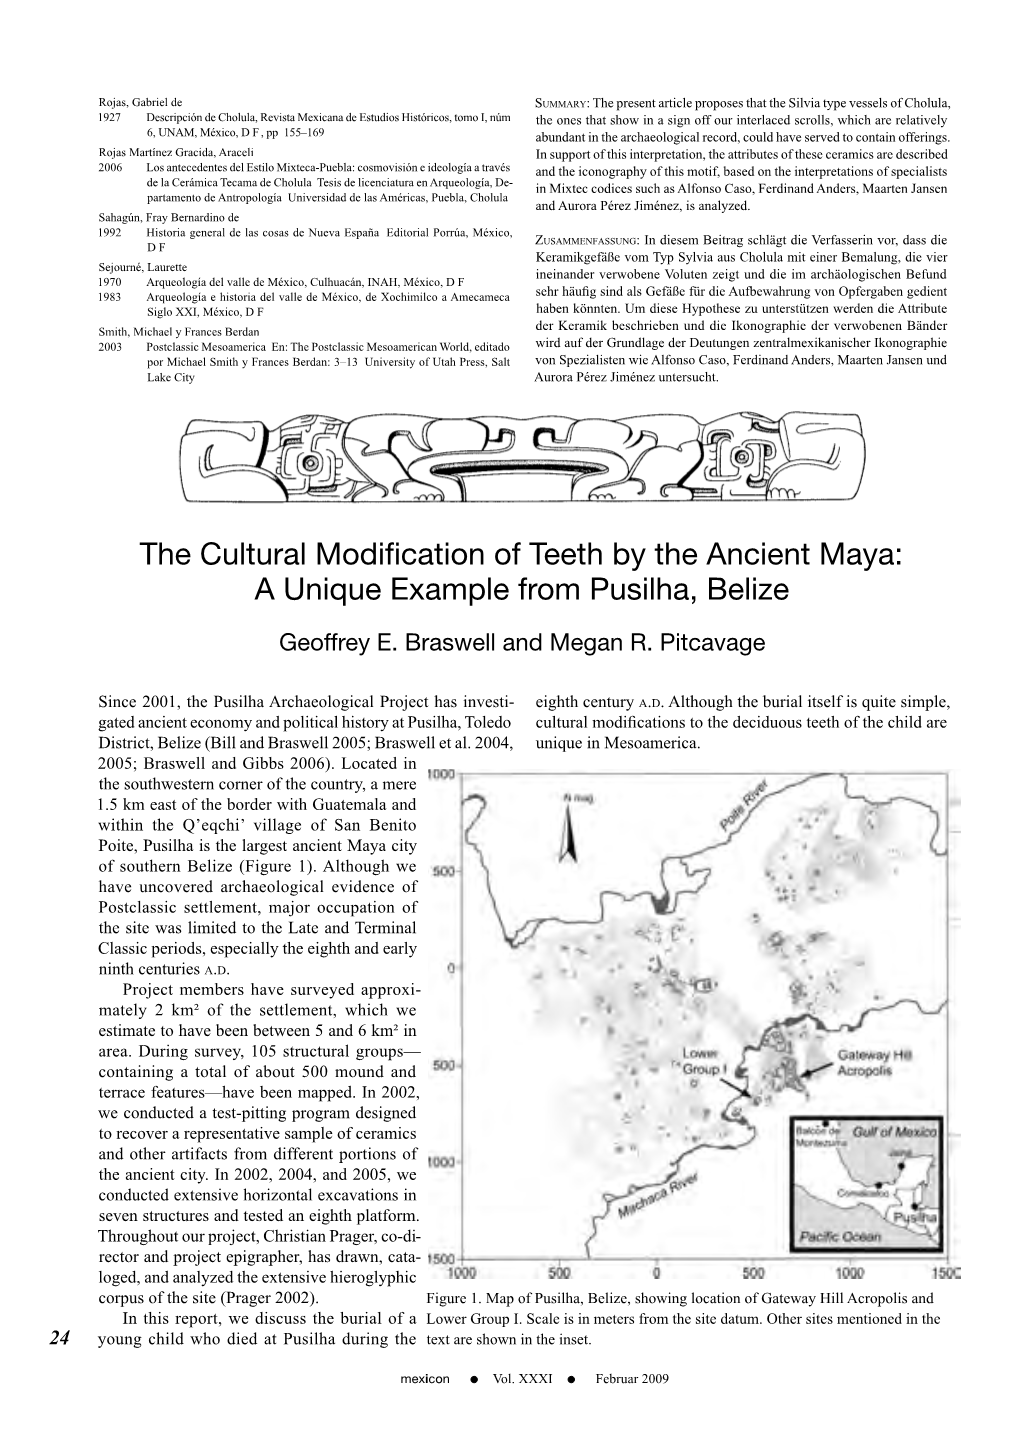 The Cultural Modification of Teeth by the Ancient Maya